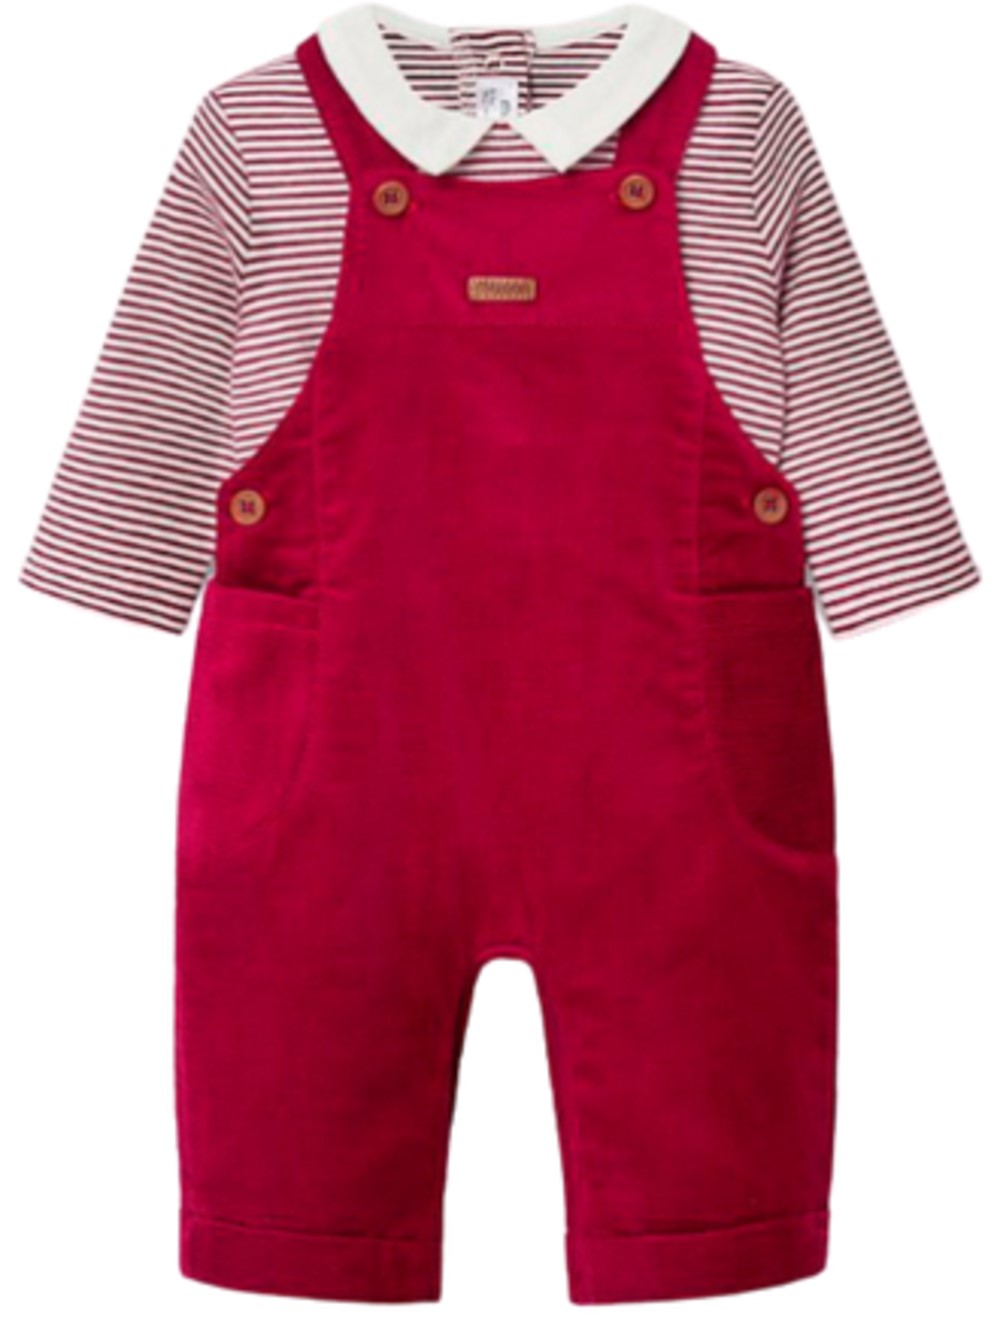 MAYORAL BABY BOYS' RED AND WHITE MICRO-CORDUROY OVERALL PANTS SET 